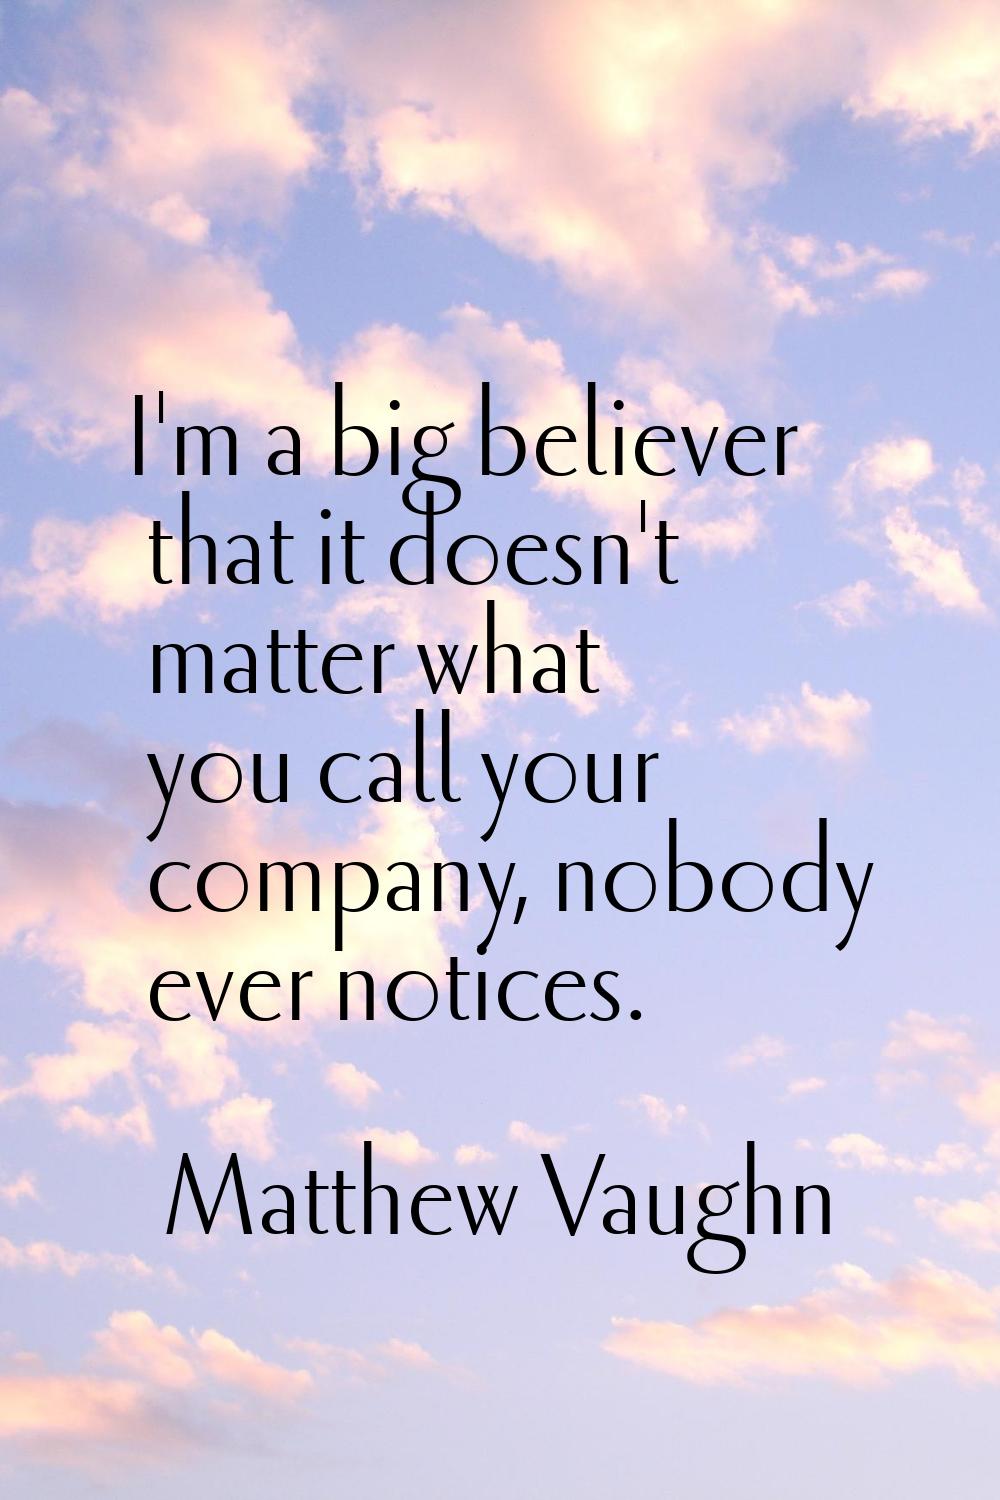 I'm a big believer that it doesn't matter what you call your company, nobody ever notices.